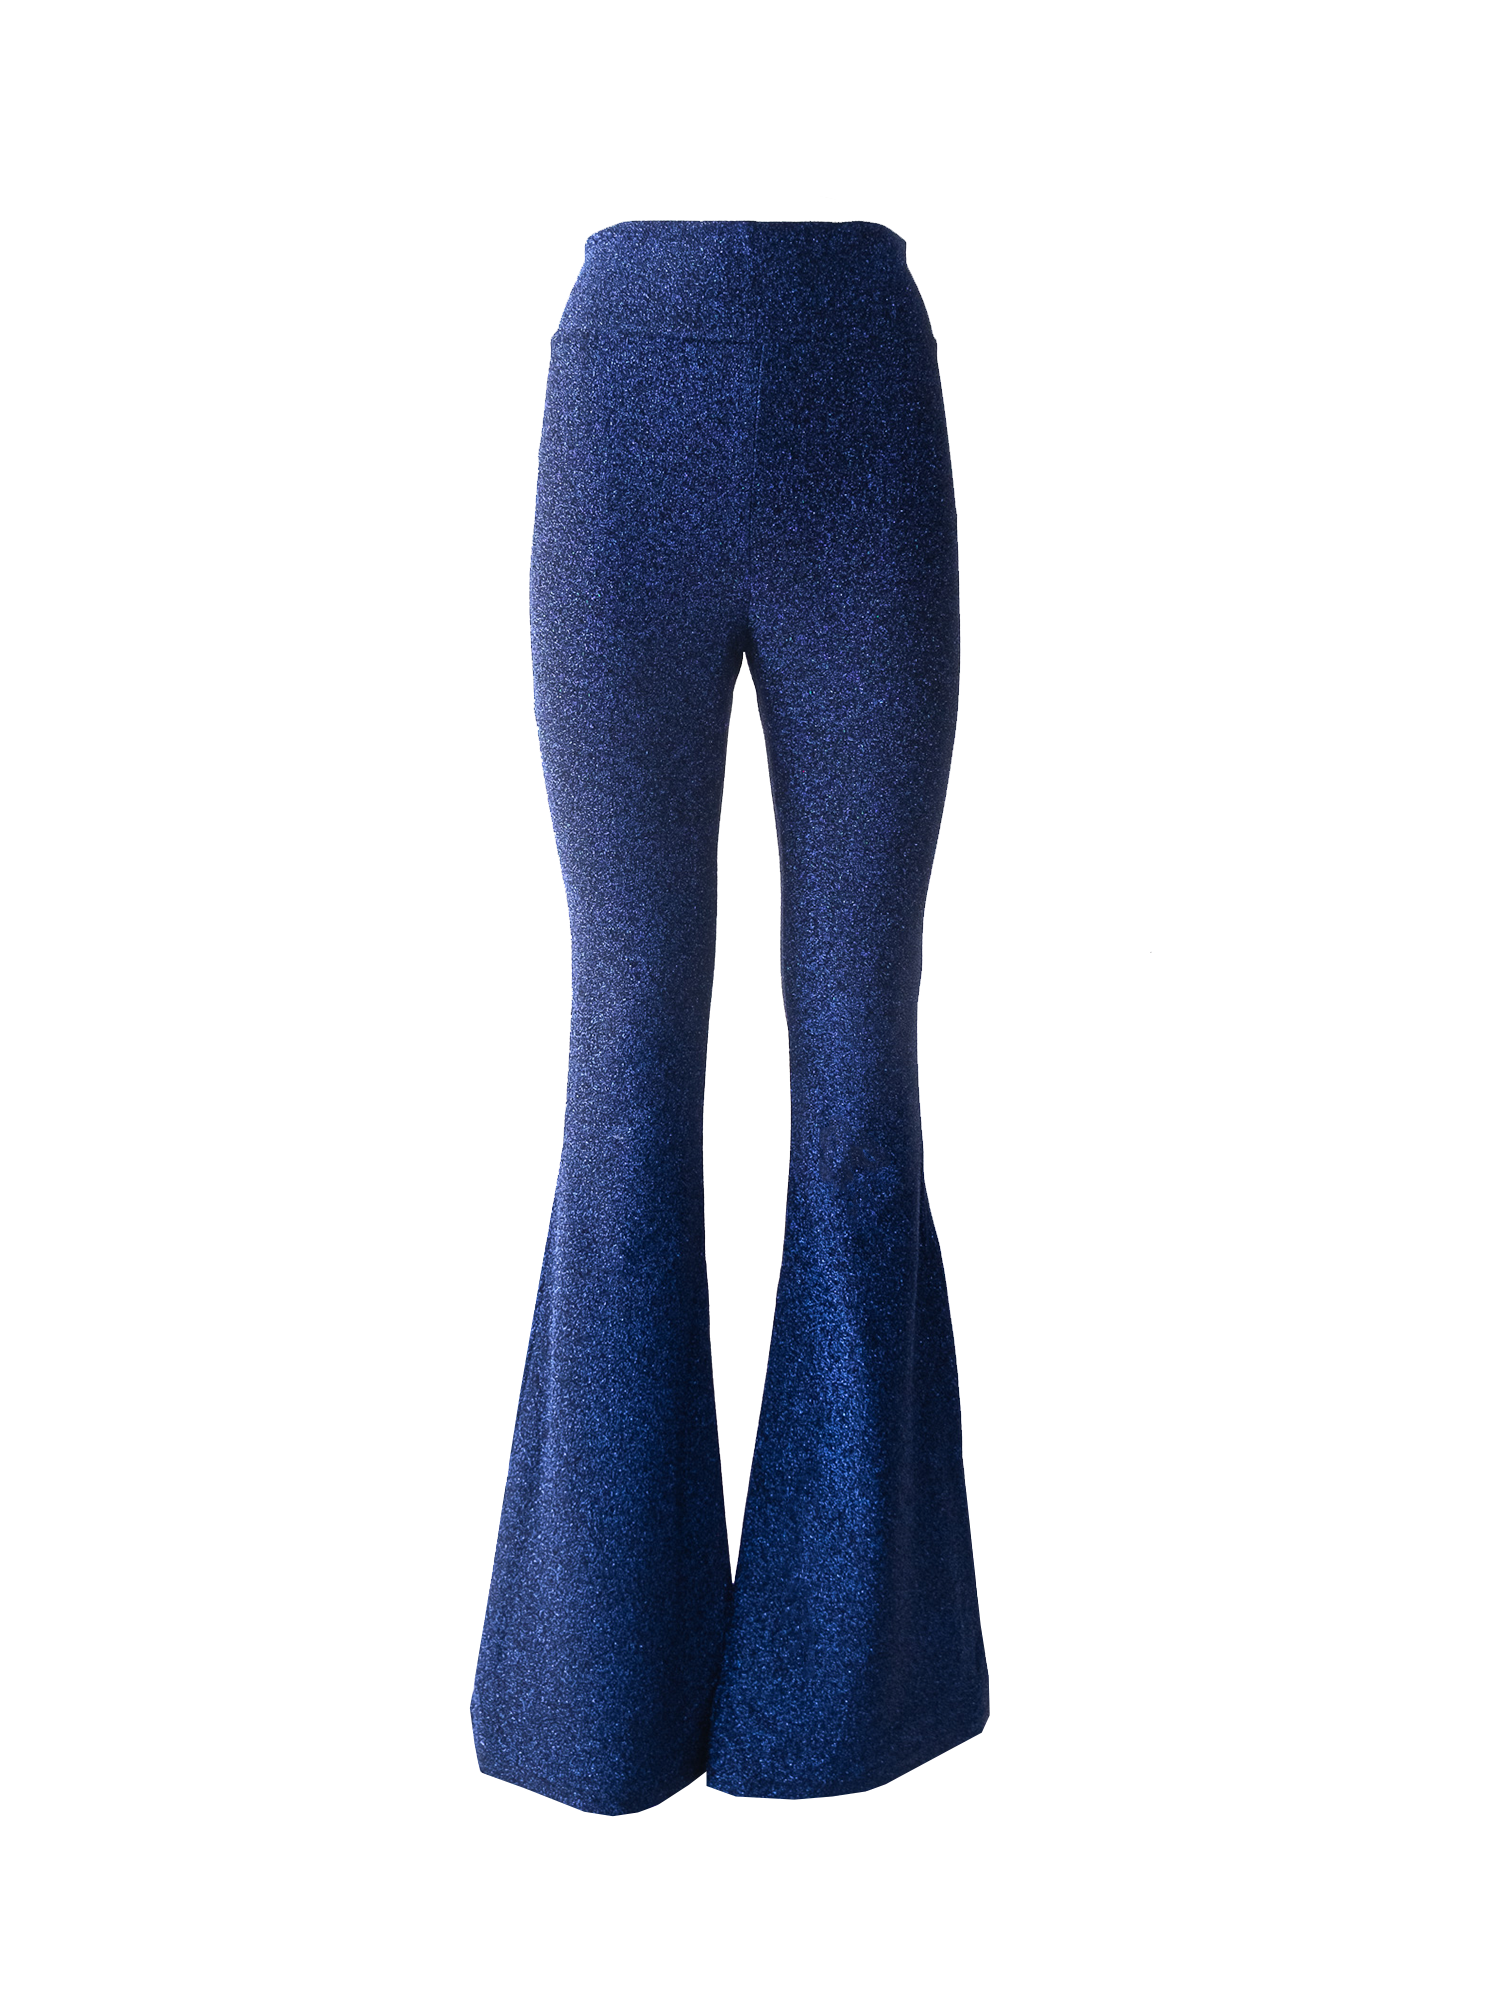 LOLA - flared trouser with high waist in blue lurex